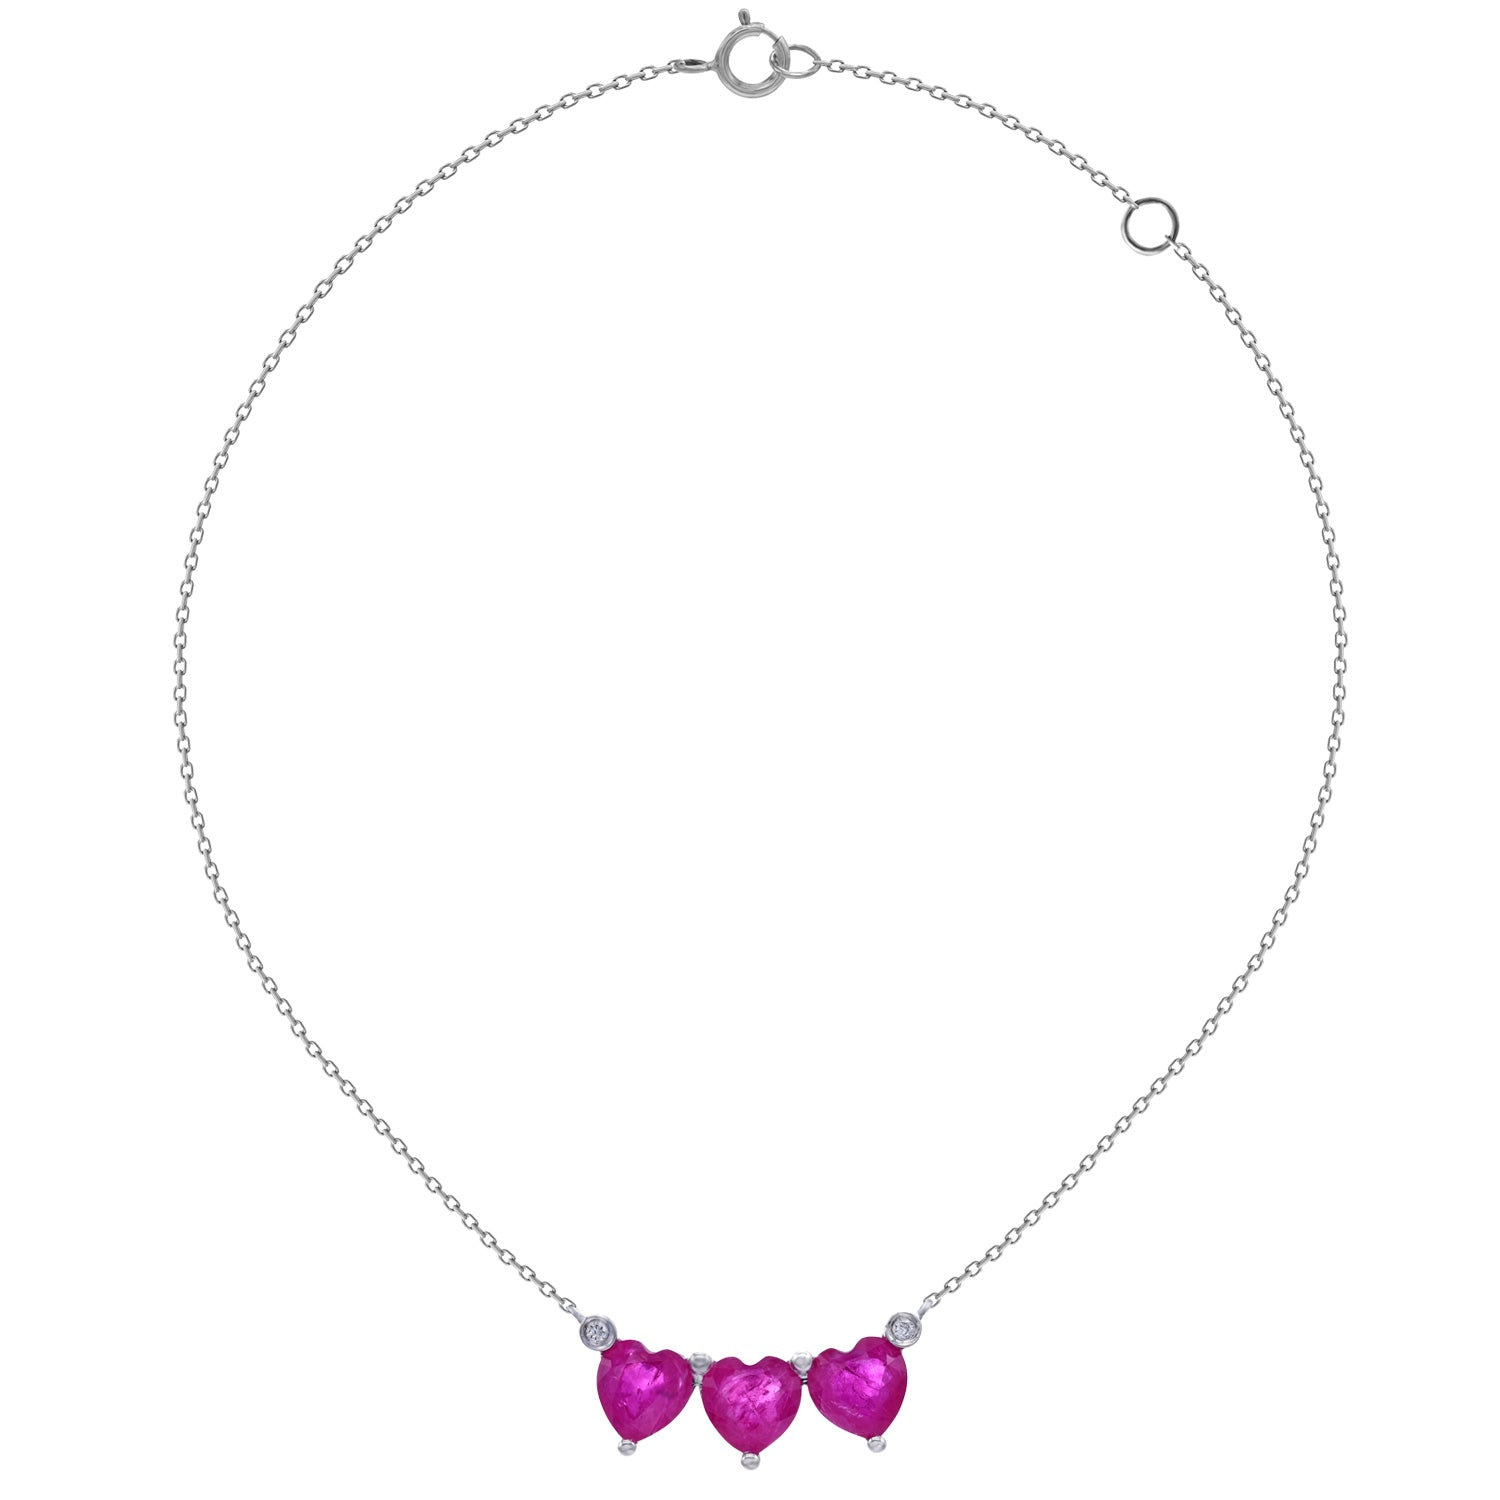 Diamond and Ruby heart necklace